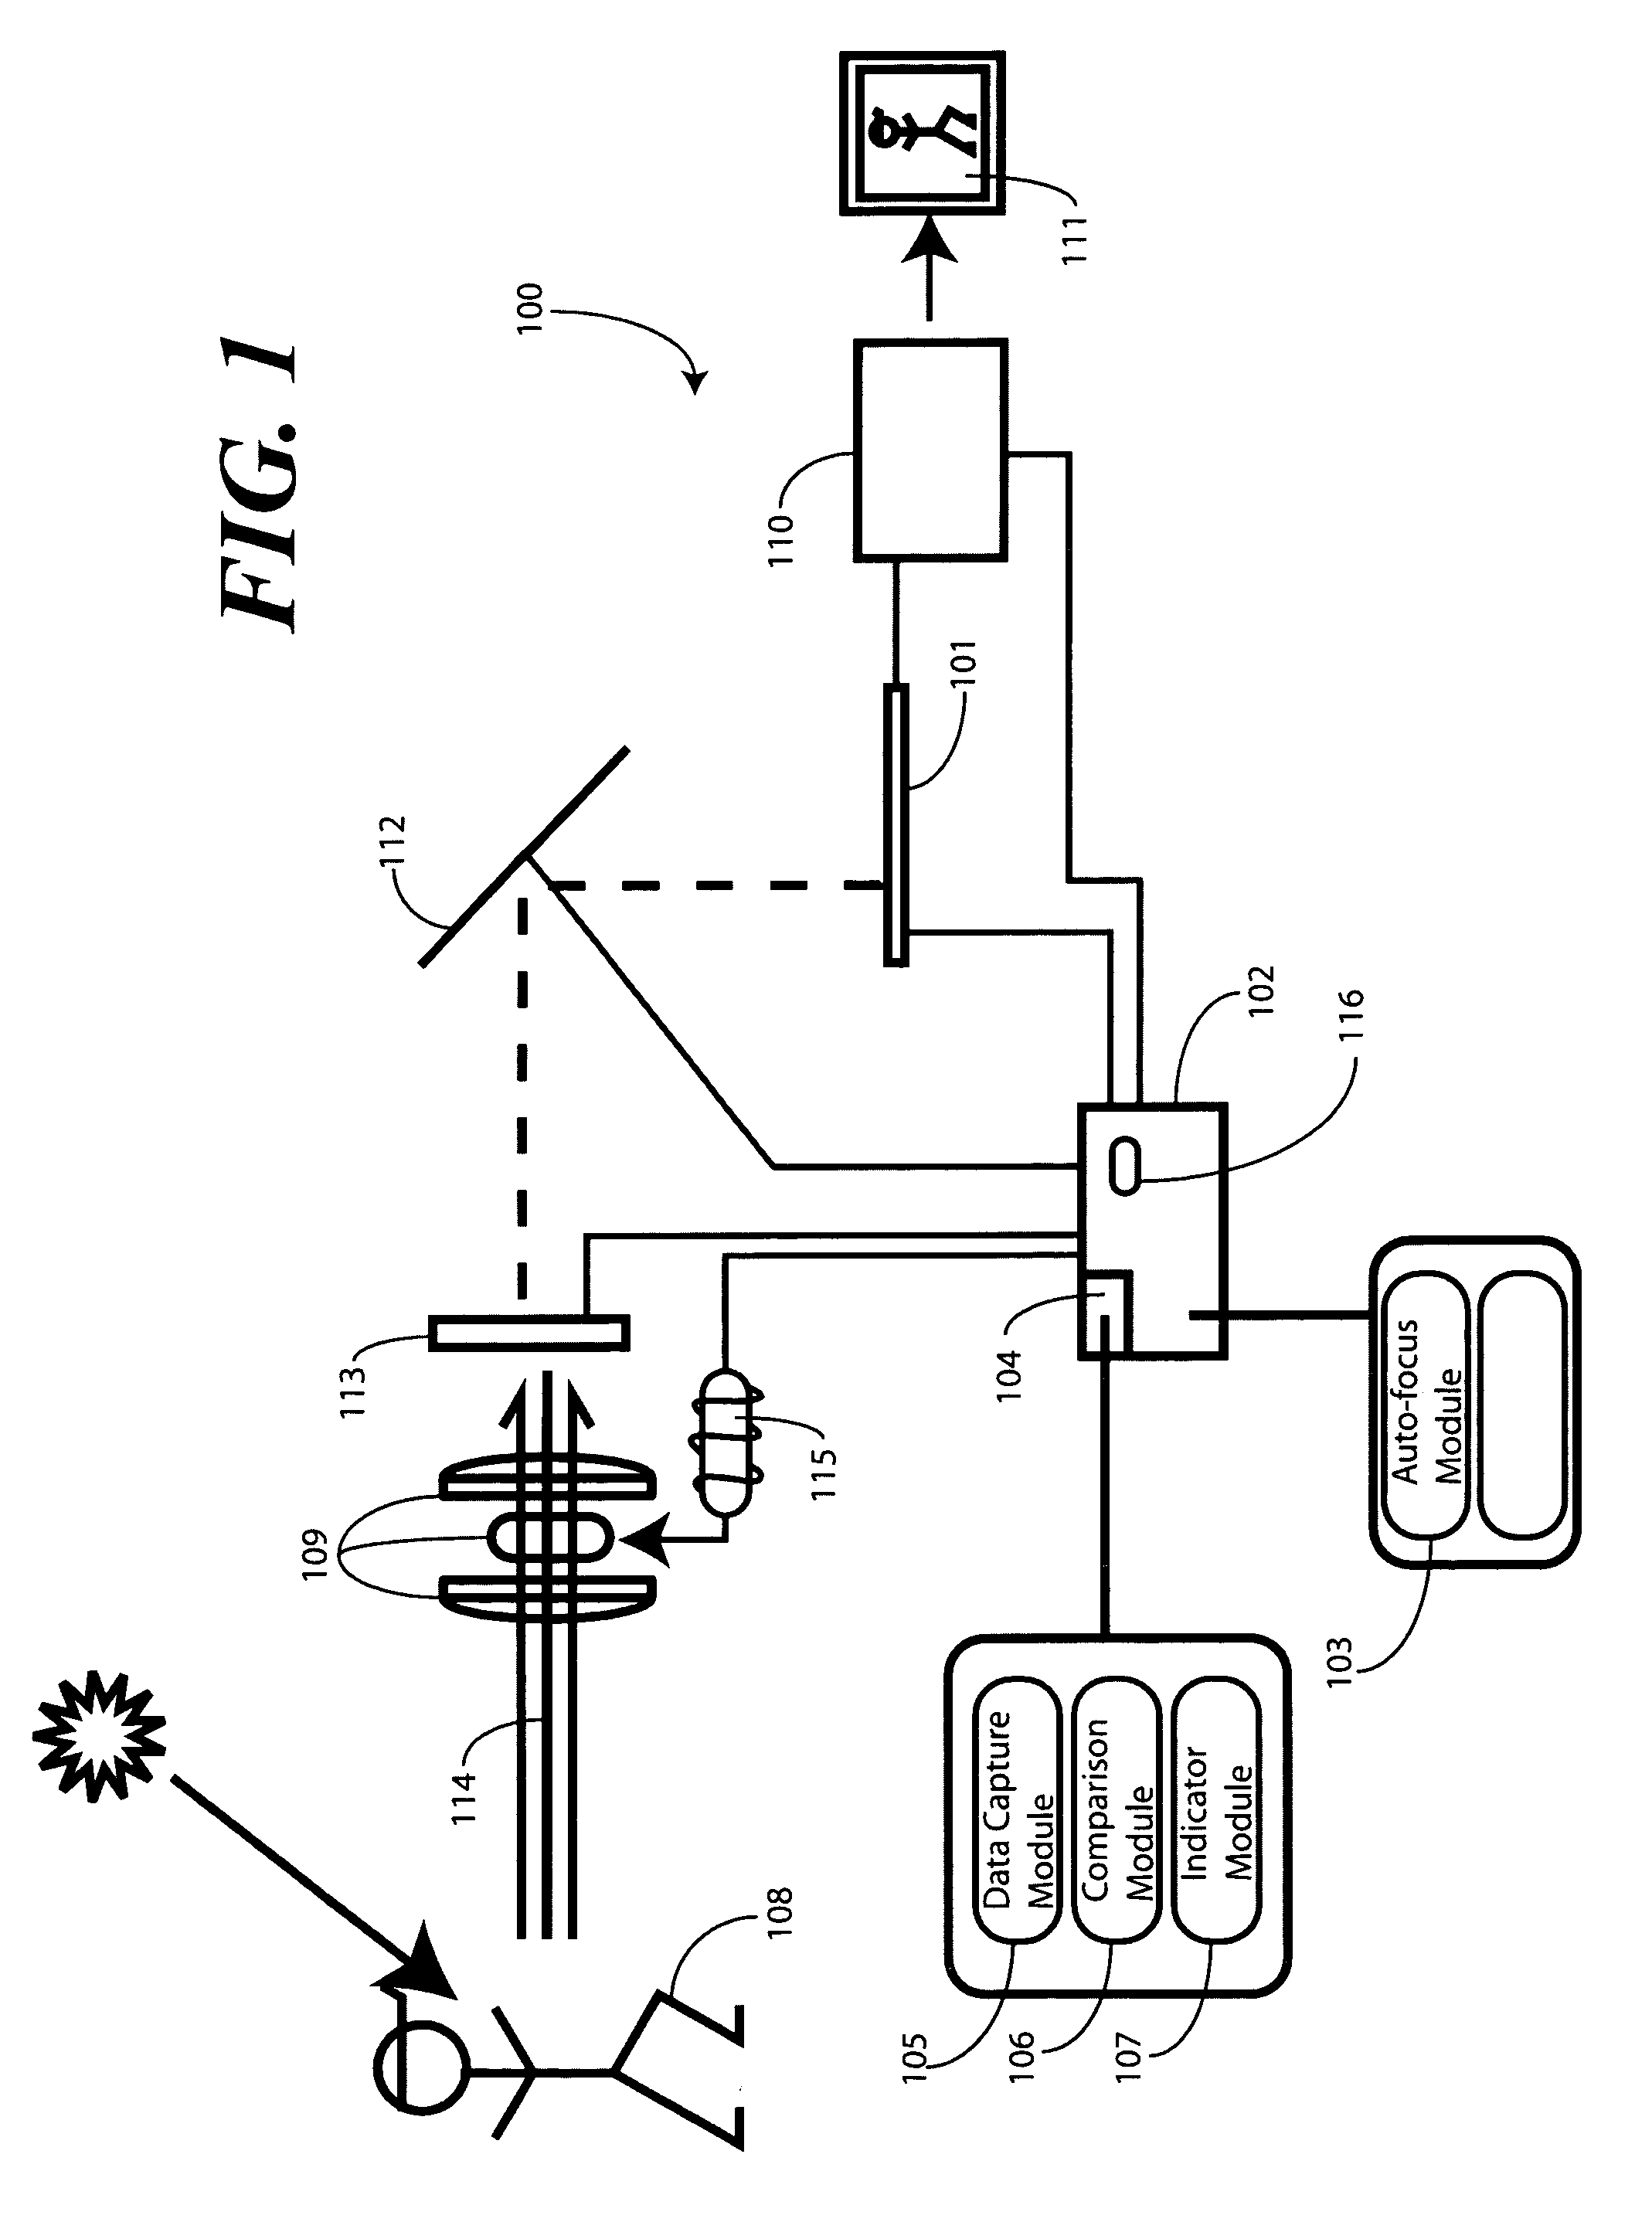 Method and Apparatus for Motion Detection in Auto-Focus Applications